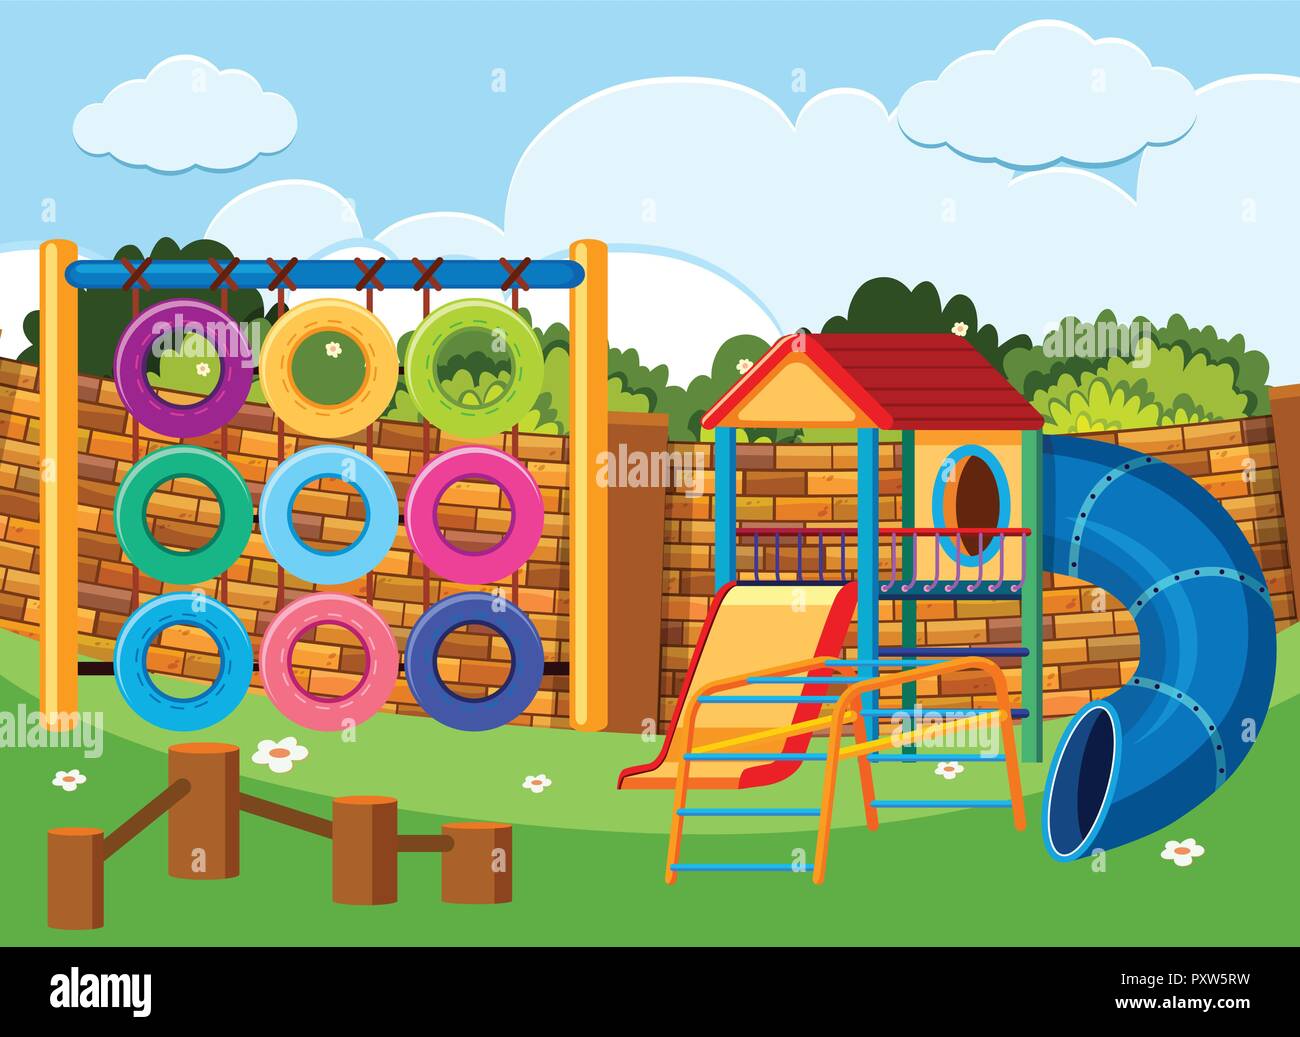 Playground scene with climbing station and slides illustration Stock Vector